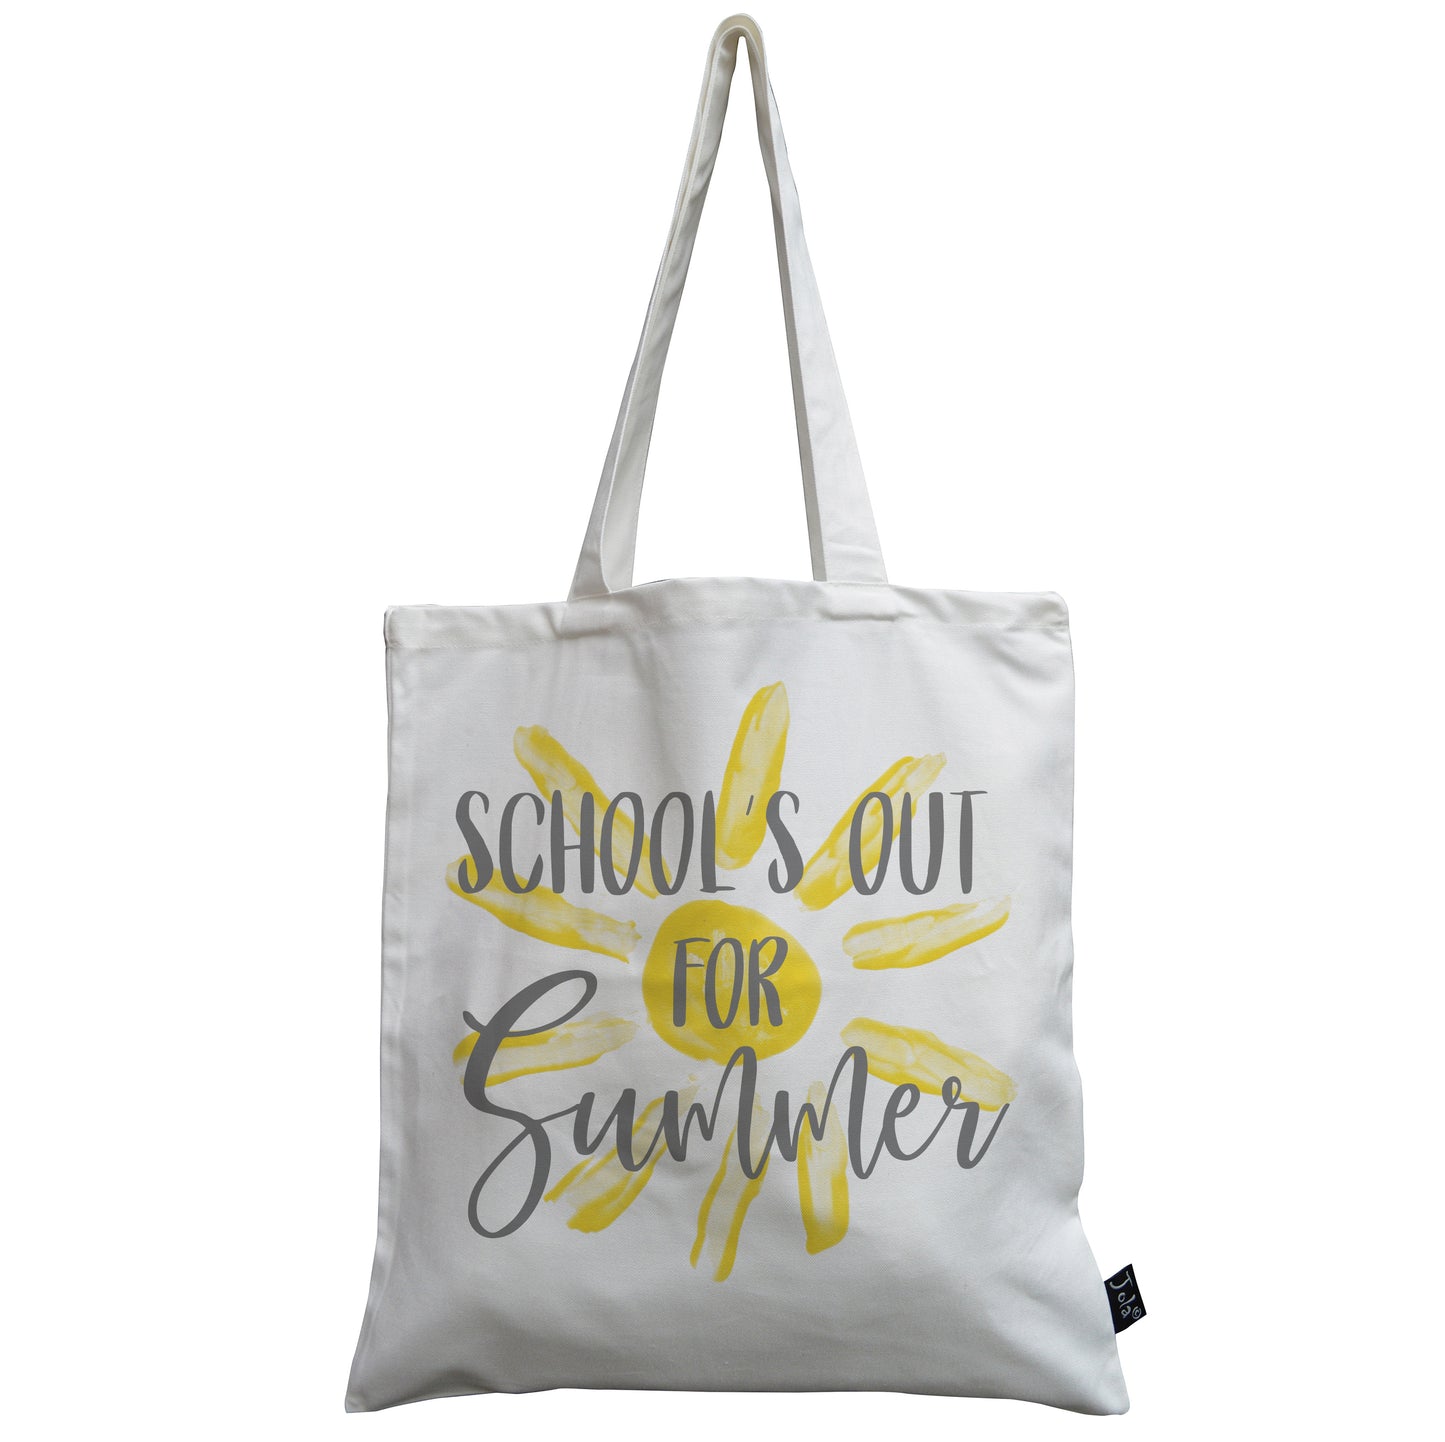 Schools out for summer canvas bag